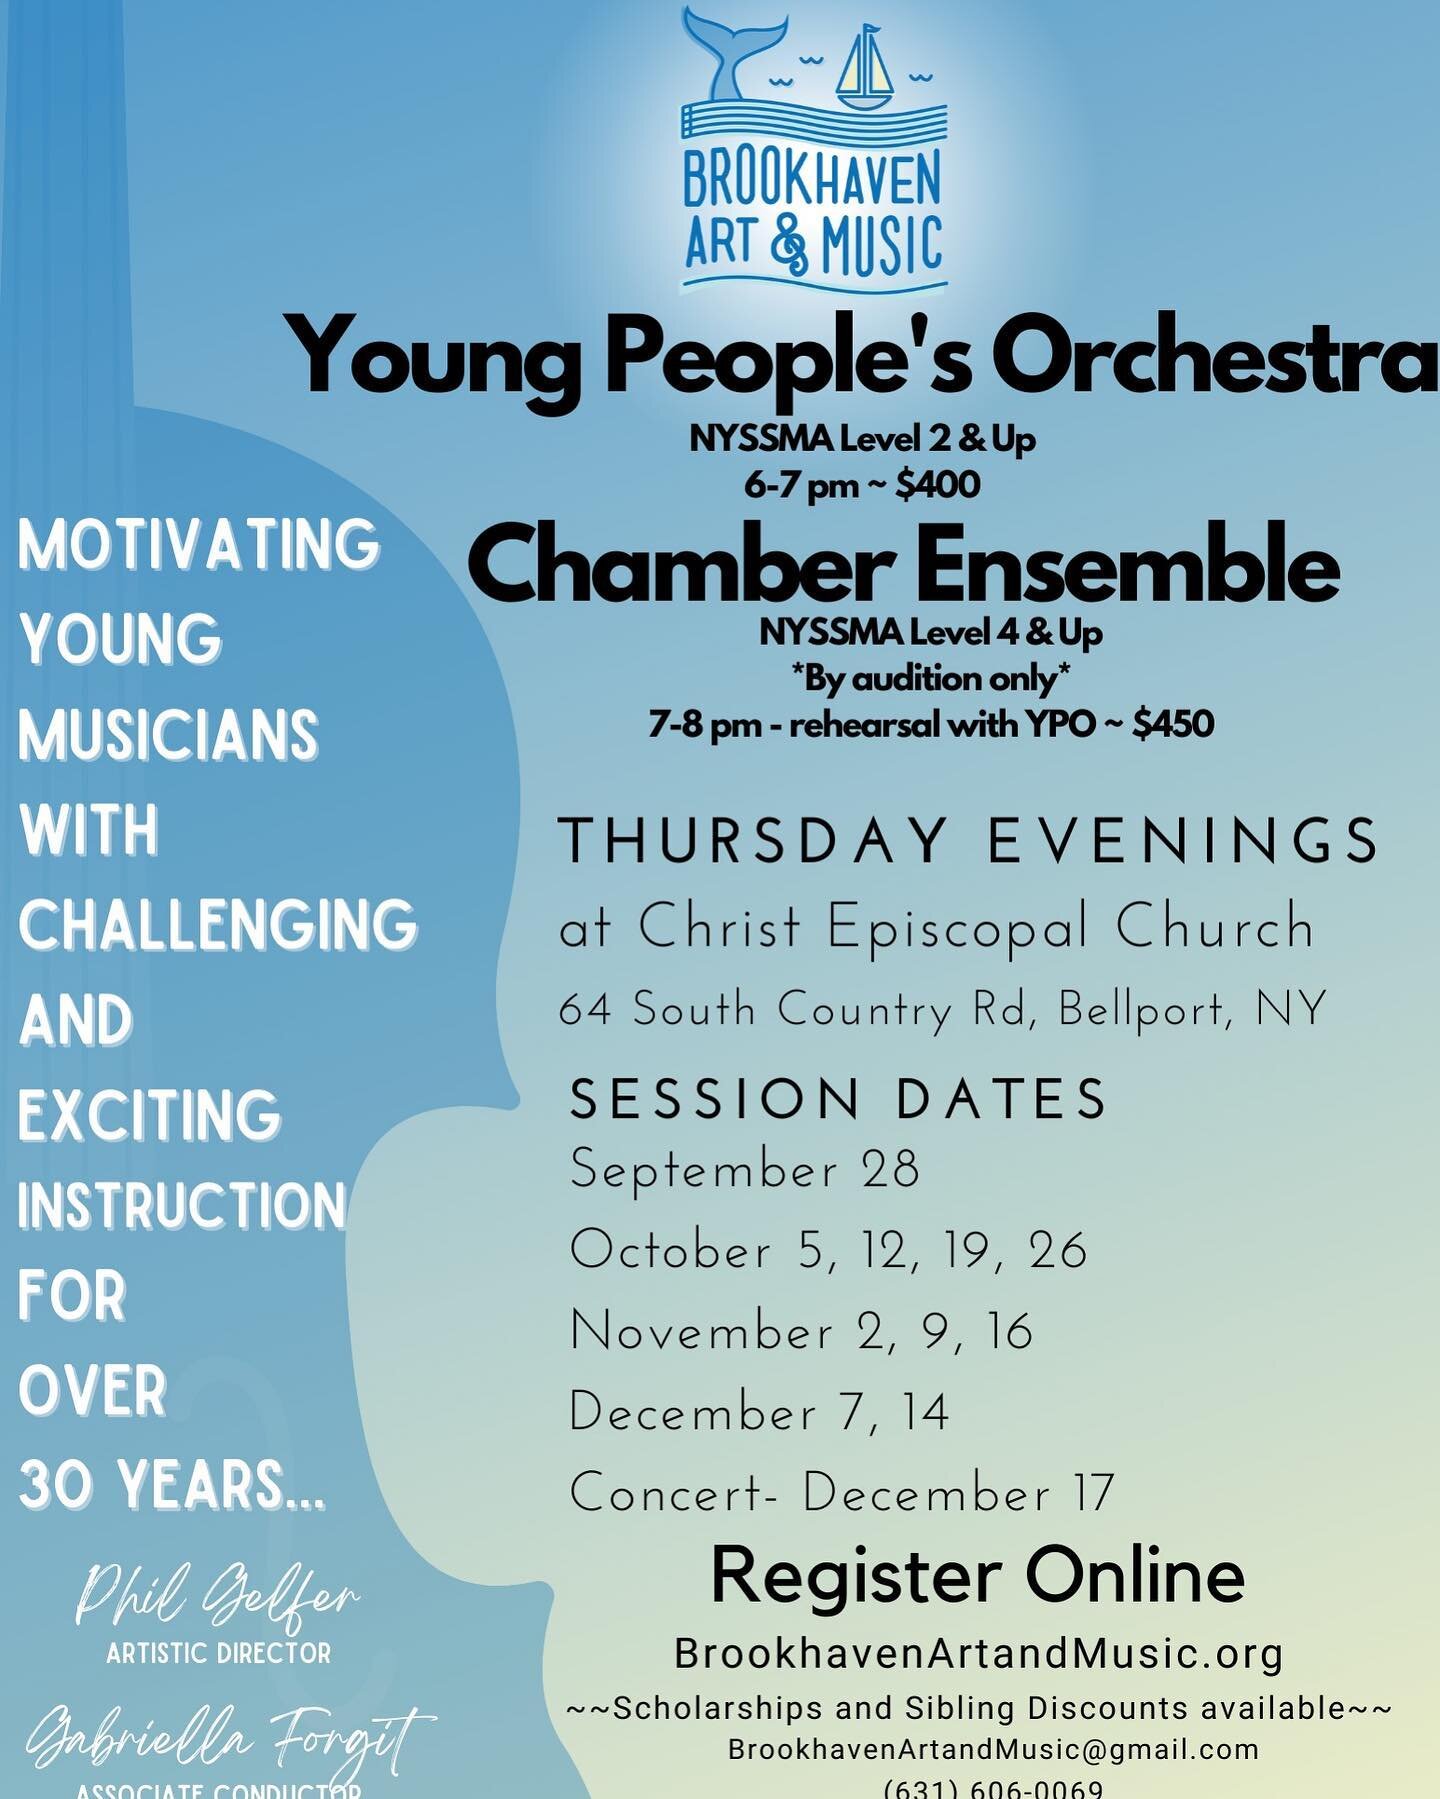 Be sure to check out our website and register for the fall season of YPO and Chamber Ensemble! It&rsquo;s going to be an exciting season with Ms. Forgit as our new YPO conductor!